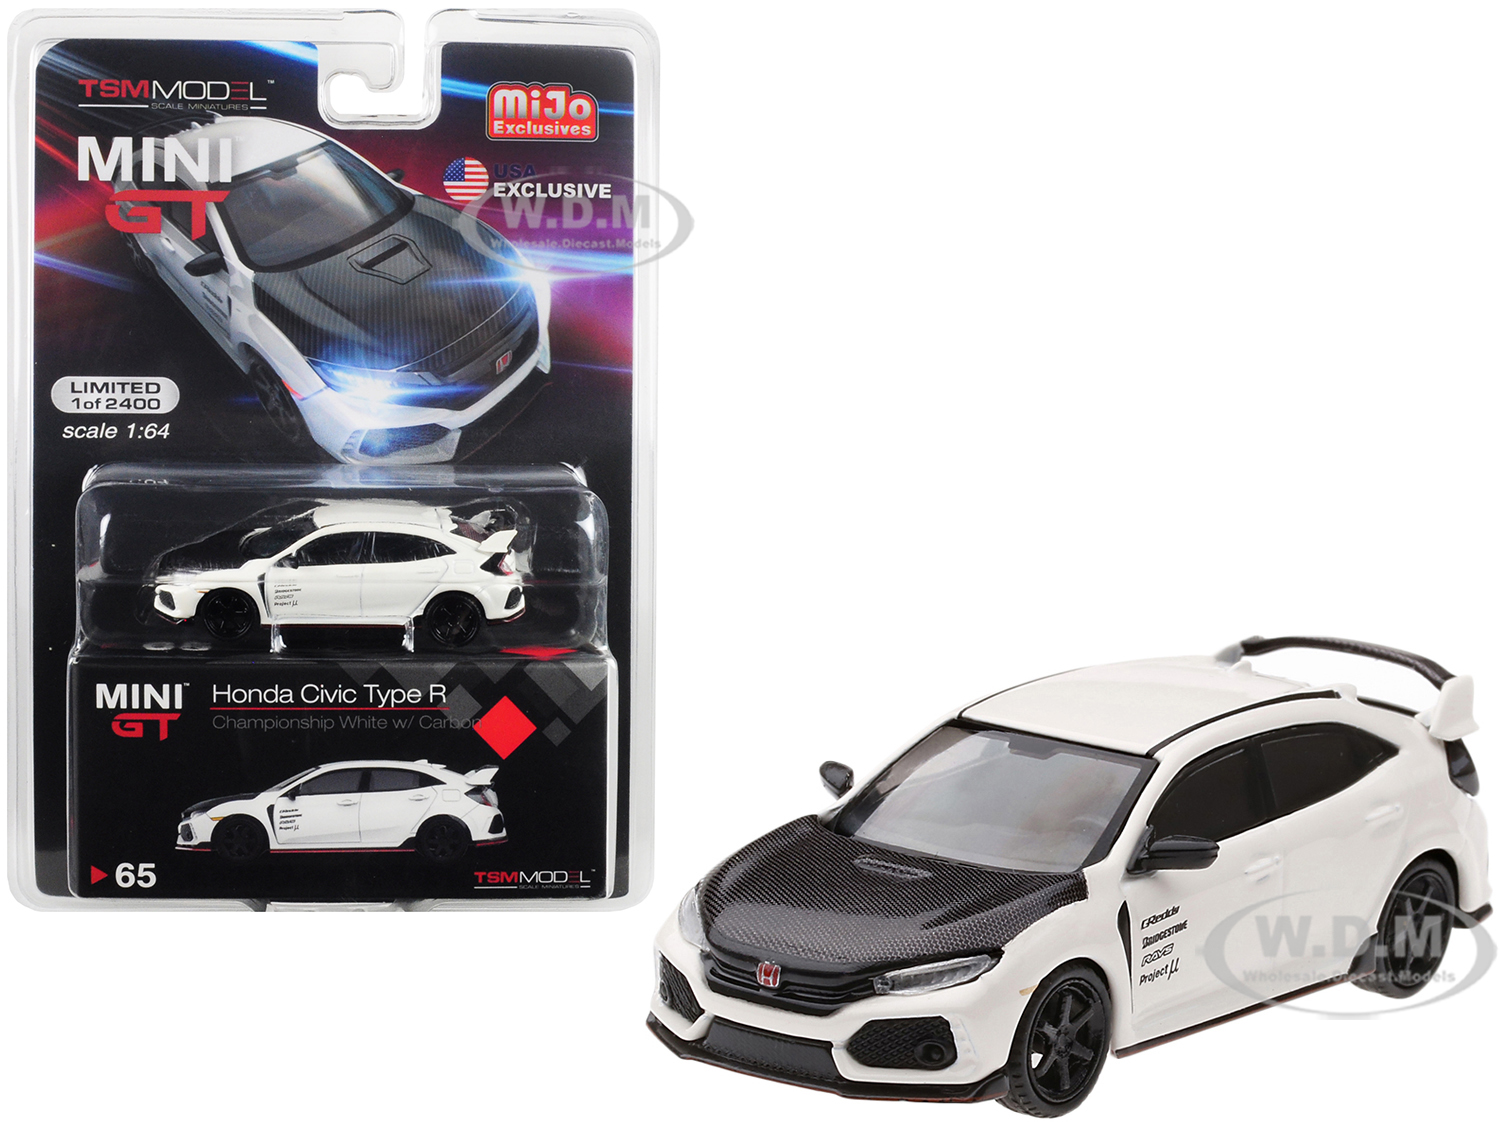 Honda Civic Type R (fk8) Championship White With Carbon Hood And Te37 Wheels Limited Edition To 2400 Pieces Worldwide 1/64 Diecast Model Car By True